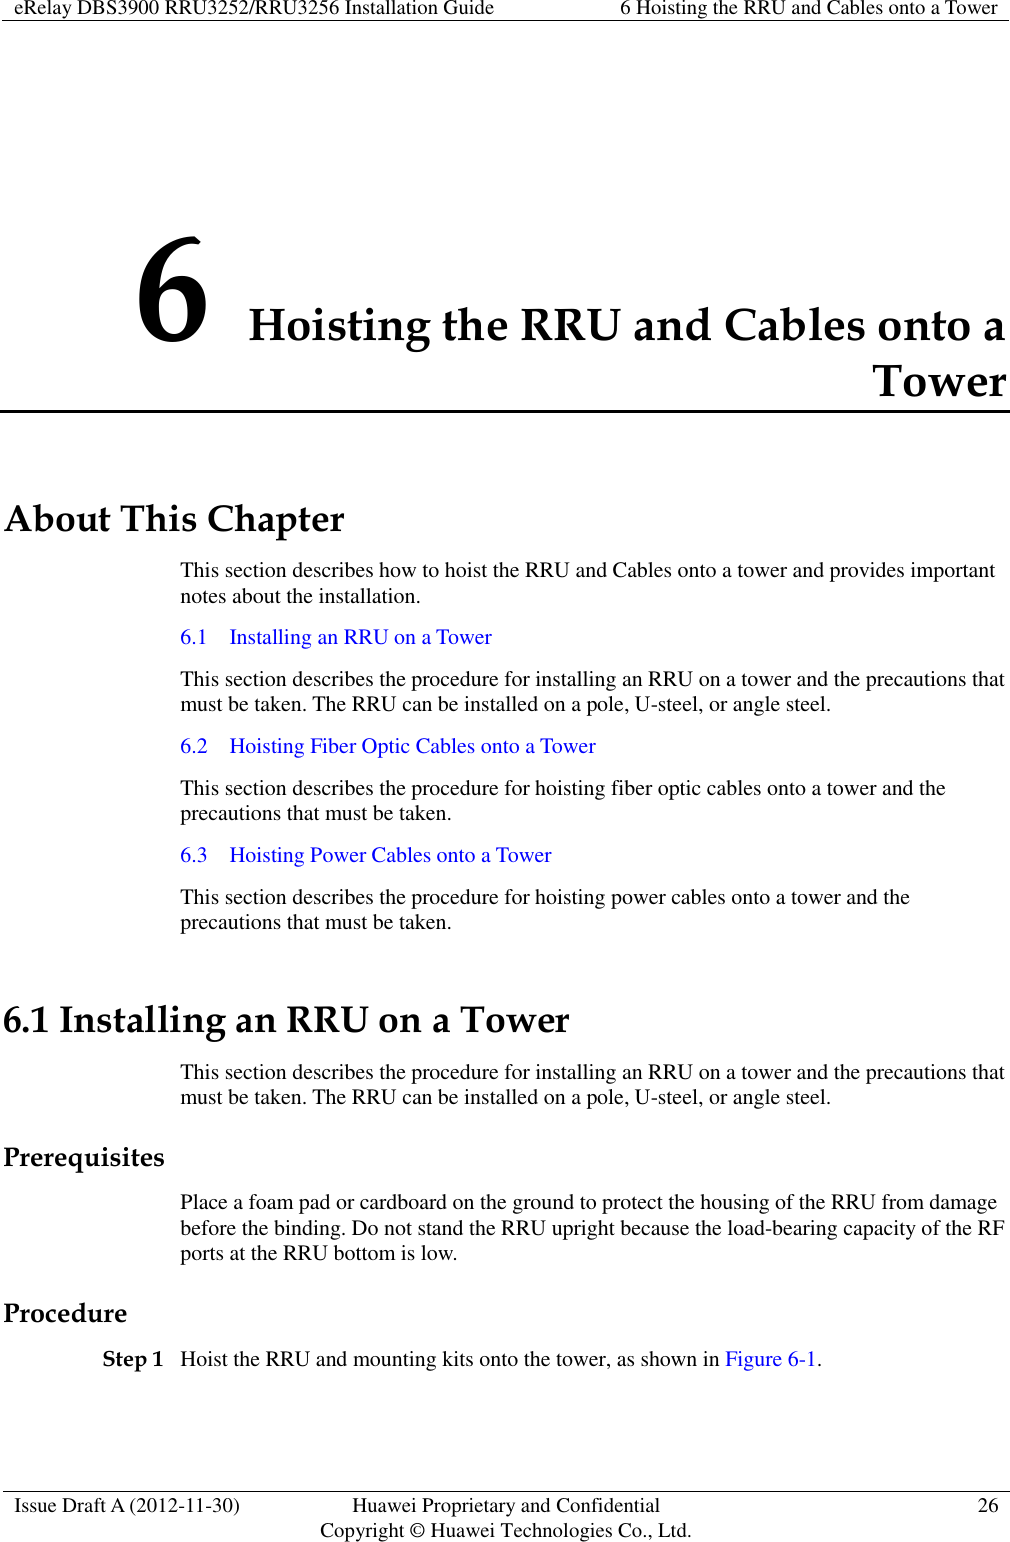 eRelay DBS3900 RRU3252/RRU3256 Installation Guide 6 Hoisting the RRU and Cables onto a Tower  Issue Draft A (2012-11-30) Huawei Proprietary and Confidential                                     Copyright © Huawei Technologies Co., Ltd. 26  6 Hoisting the RRU and Cables onto a Tower About This Chapter This section describes how to hoist the RRU and Cables onto a tower and provides important notes about the installation. 6.1    Installing an RRU on a Tower This section describes the procedure for installing an RRU on a tower and the precautions that must be taken. The RRU can be installed on a pole, U-steel, or angle steel. 6.2    Hoisting Fiber Optic Cables onto a Tower This section describes the procedure for hoisting fiber optic cables onto a tower and the precautions that must be taken. 6.3    Hoisting Power Cables onto a Tower This section describes the procedure for hoisting power cables onto a tower and the precautions that must be taken. 6.1 Installing an RRU on a Tower This section describes the procedure for installing an RRU on a tower and the precautions that must be taken. The RRU can be installed on a pole, U-steel, or angle steel. Prerequisites Place a foam pad or cardboard on the ground to protect the housing of the RRU from damage before the binding. Do not stand the RRU upright because the load-bearing capacity of the RF ports at the RRU bottom is low. Procedure Step 1 Hoist the RRU and mounting kits onto the tower, as shown in Figure 6-1. 